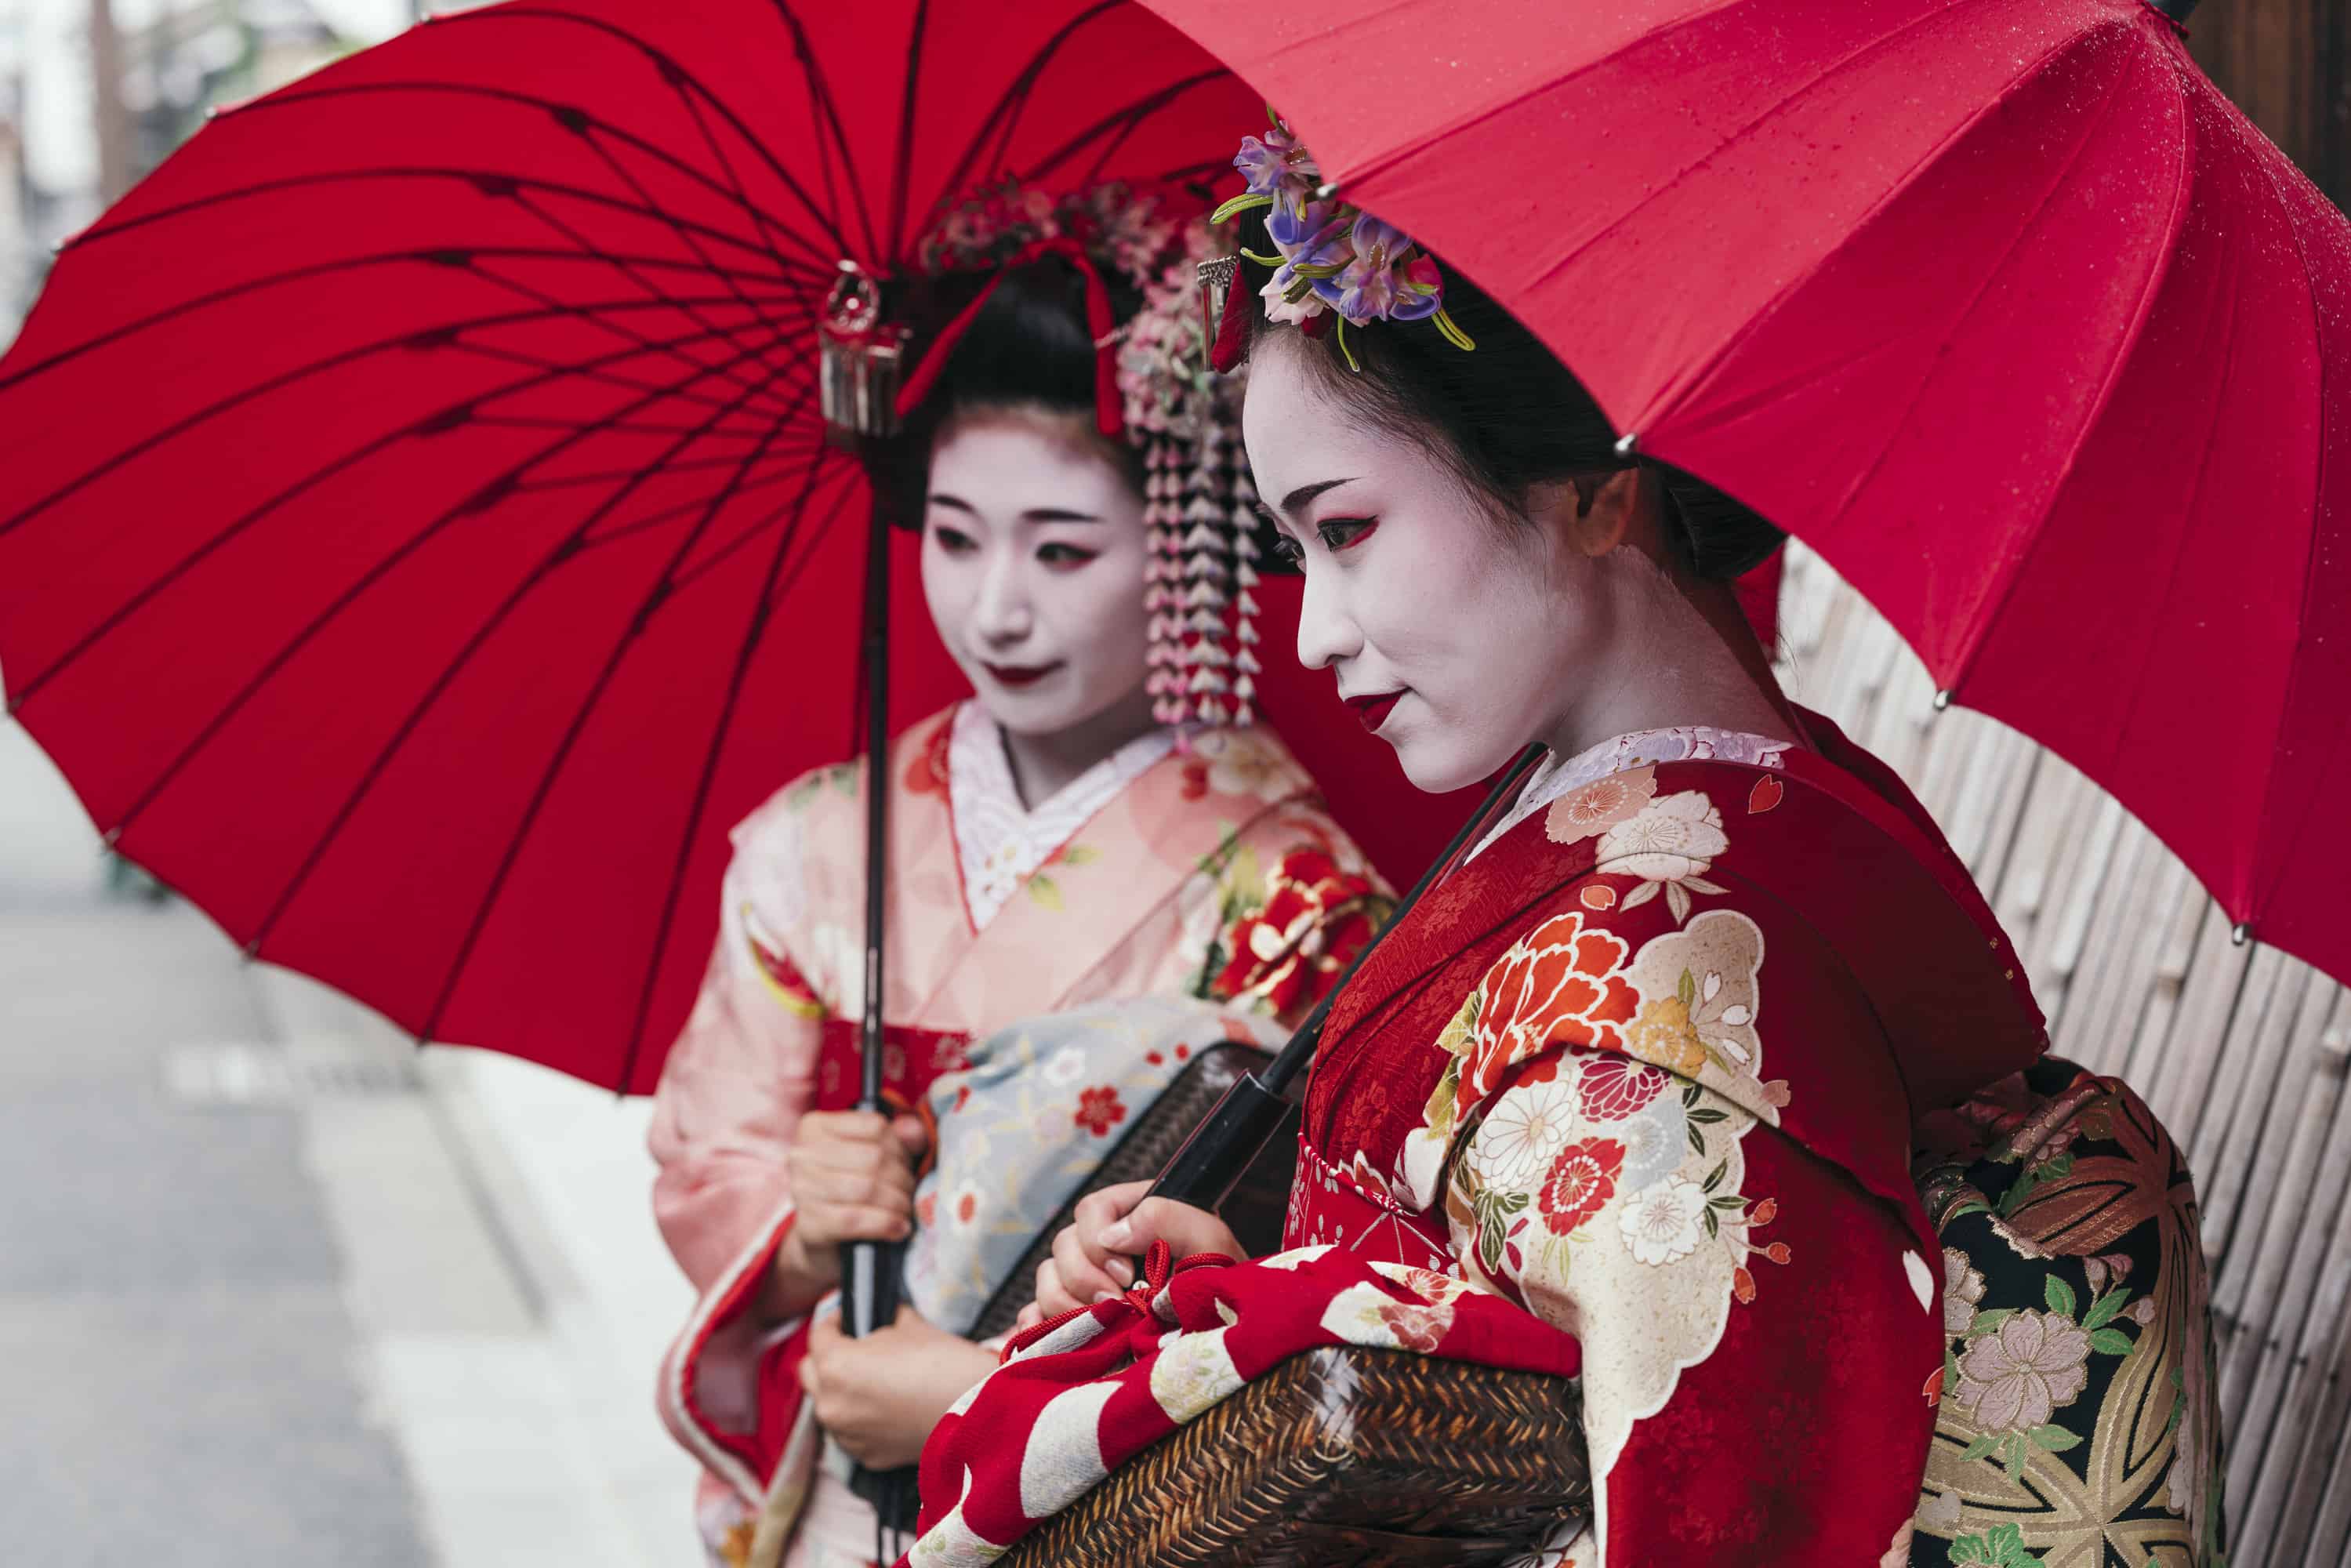 What Is a Geisha, Anyway?